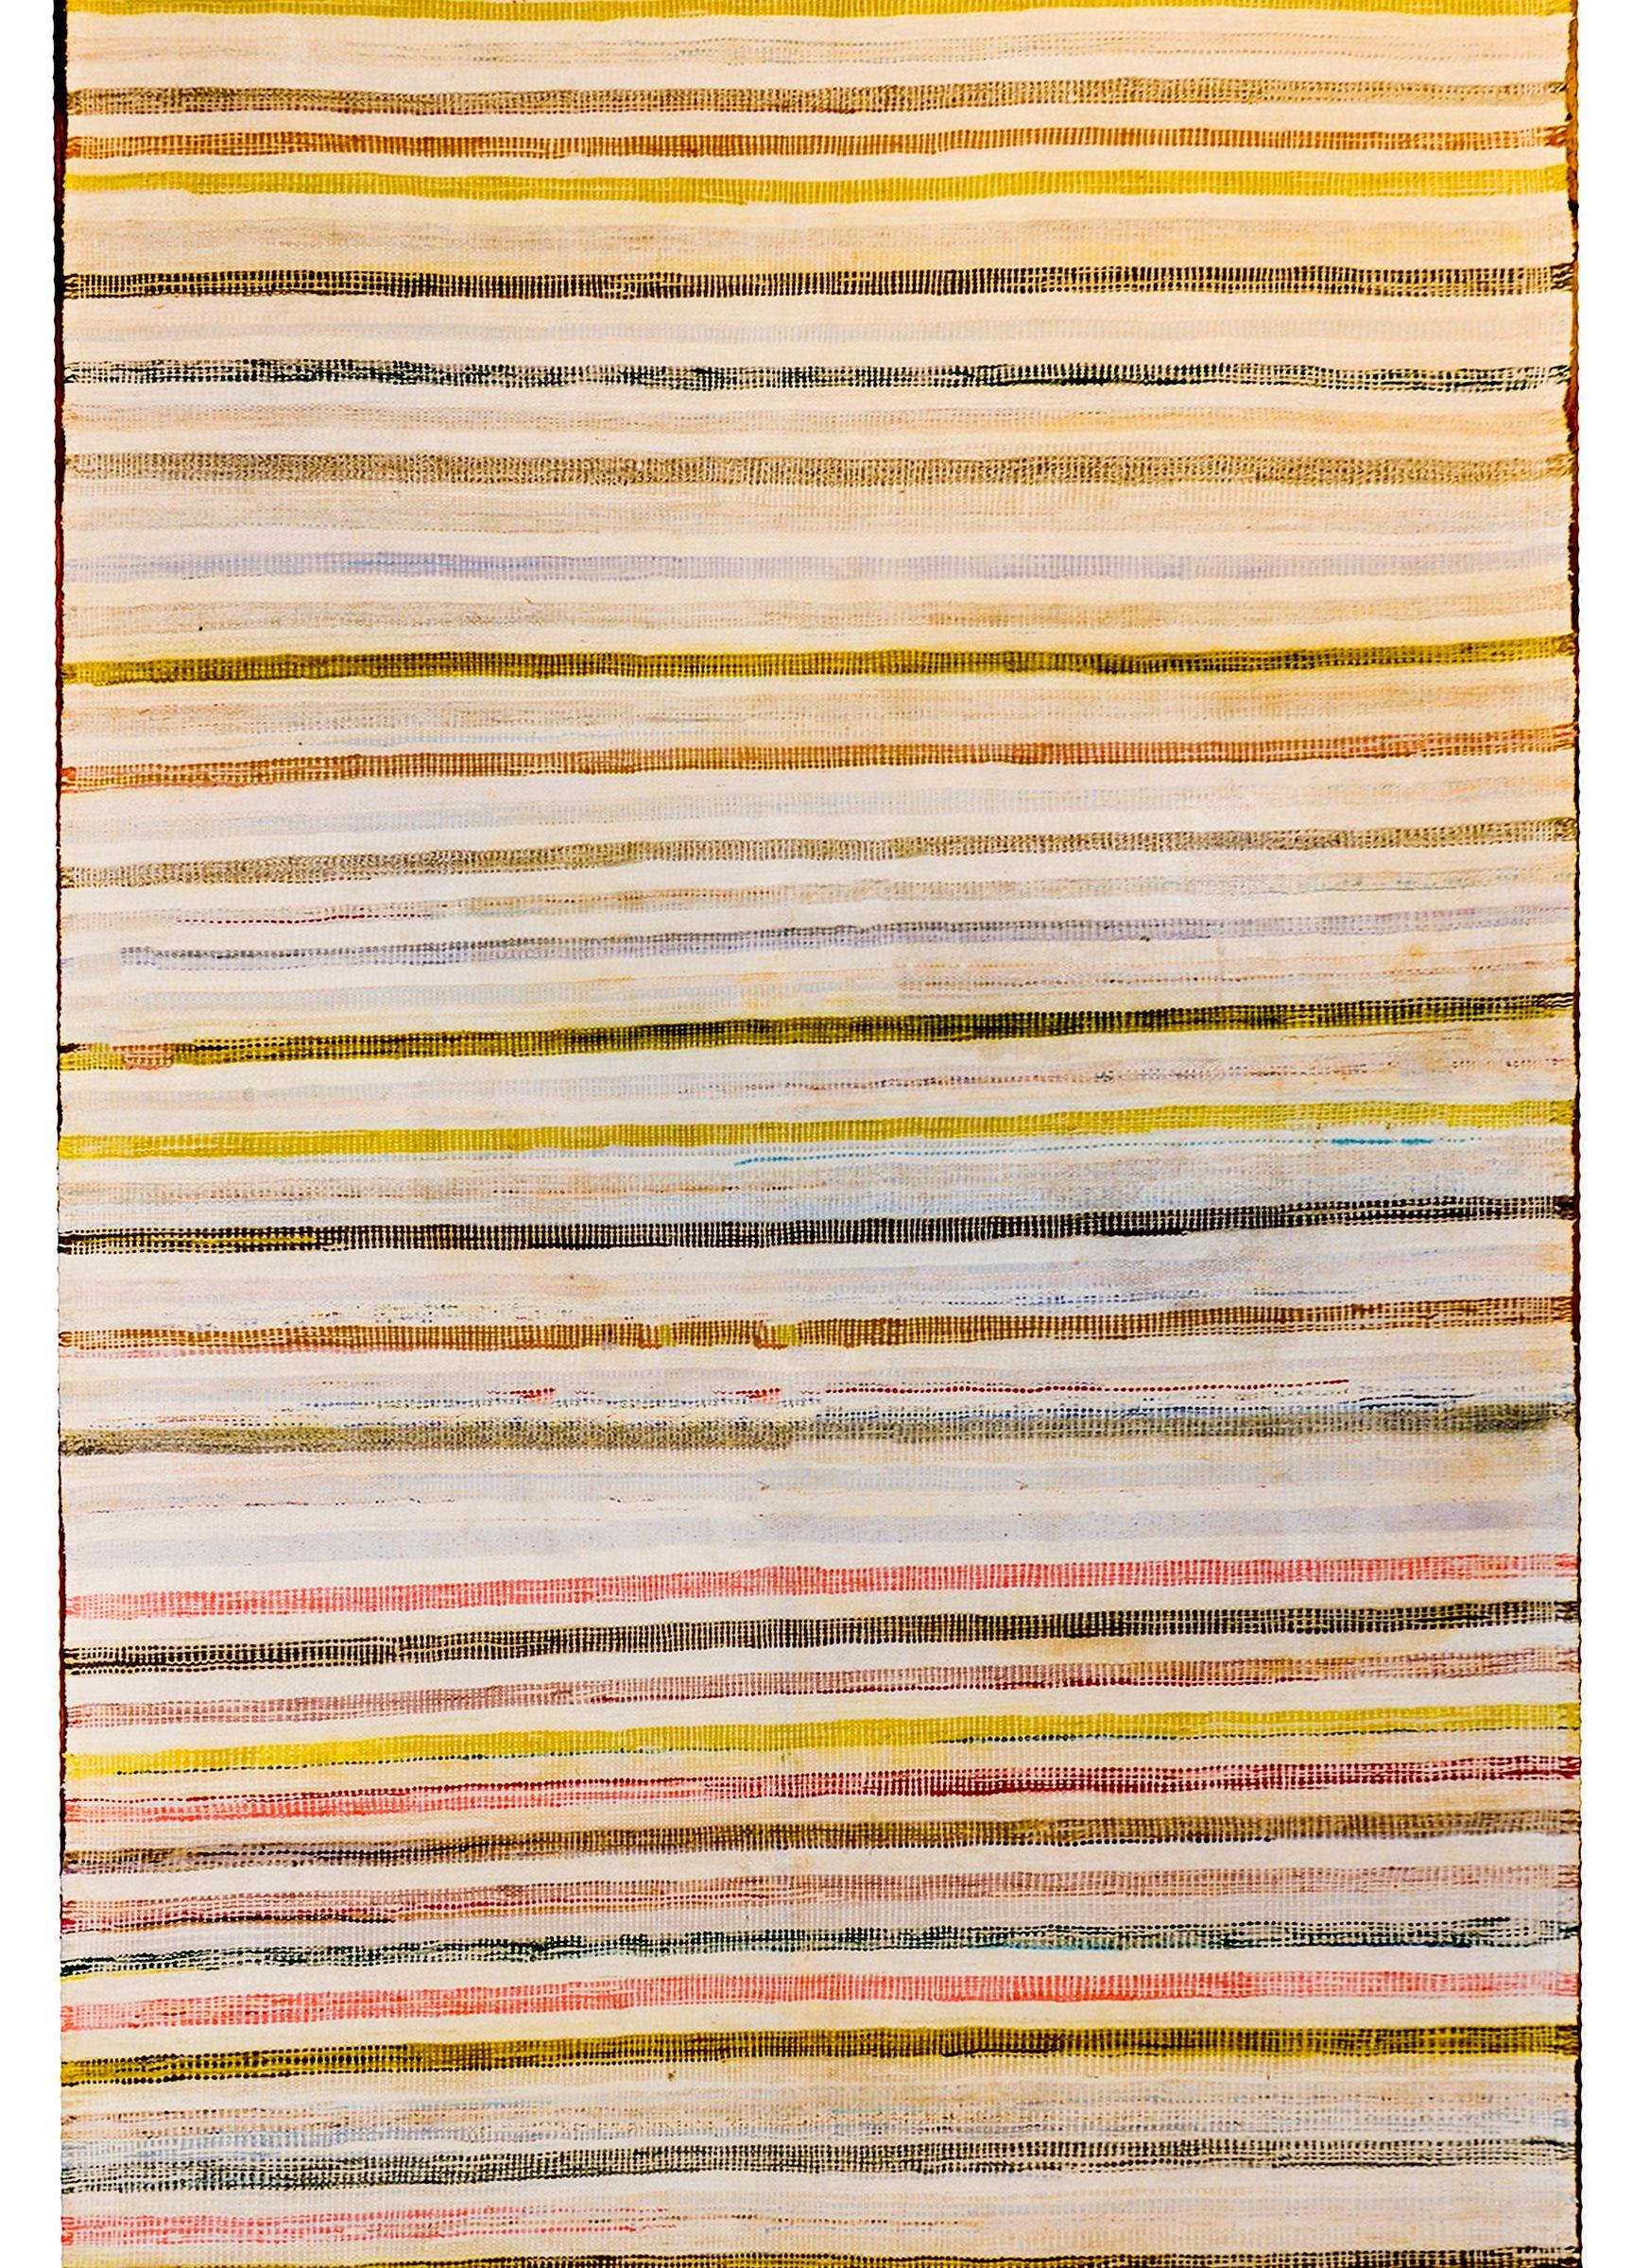 A sweet mid-20th century Persian Saveh Kilim rug woven with varying colored cotton stripes running horizontally across the field.